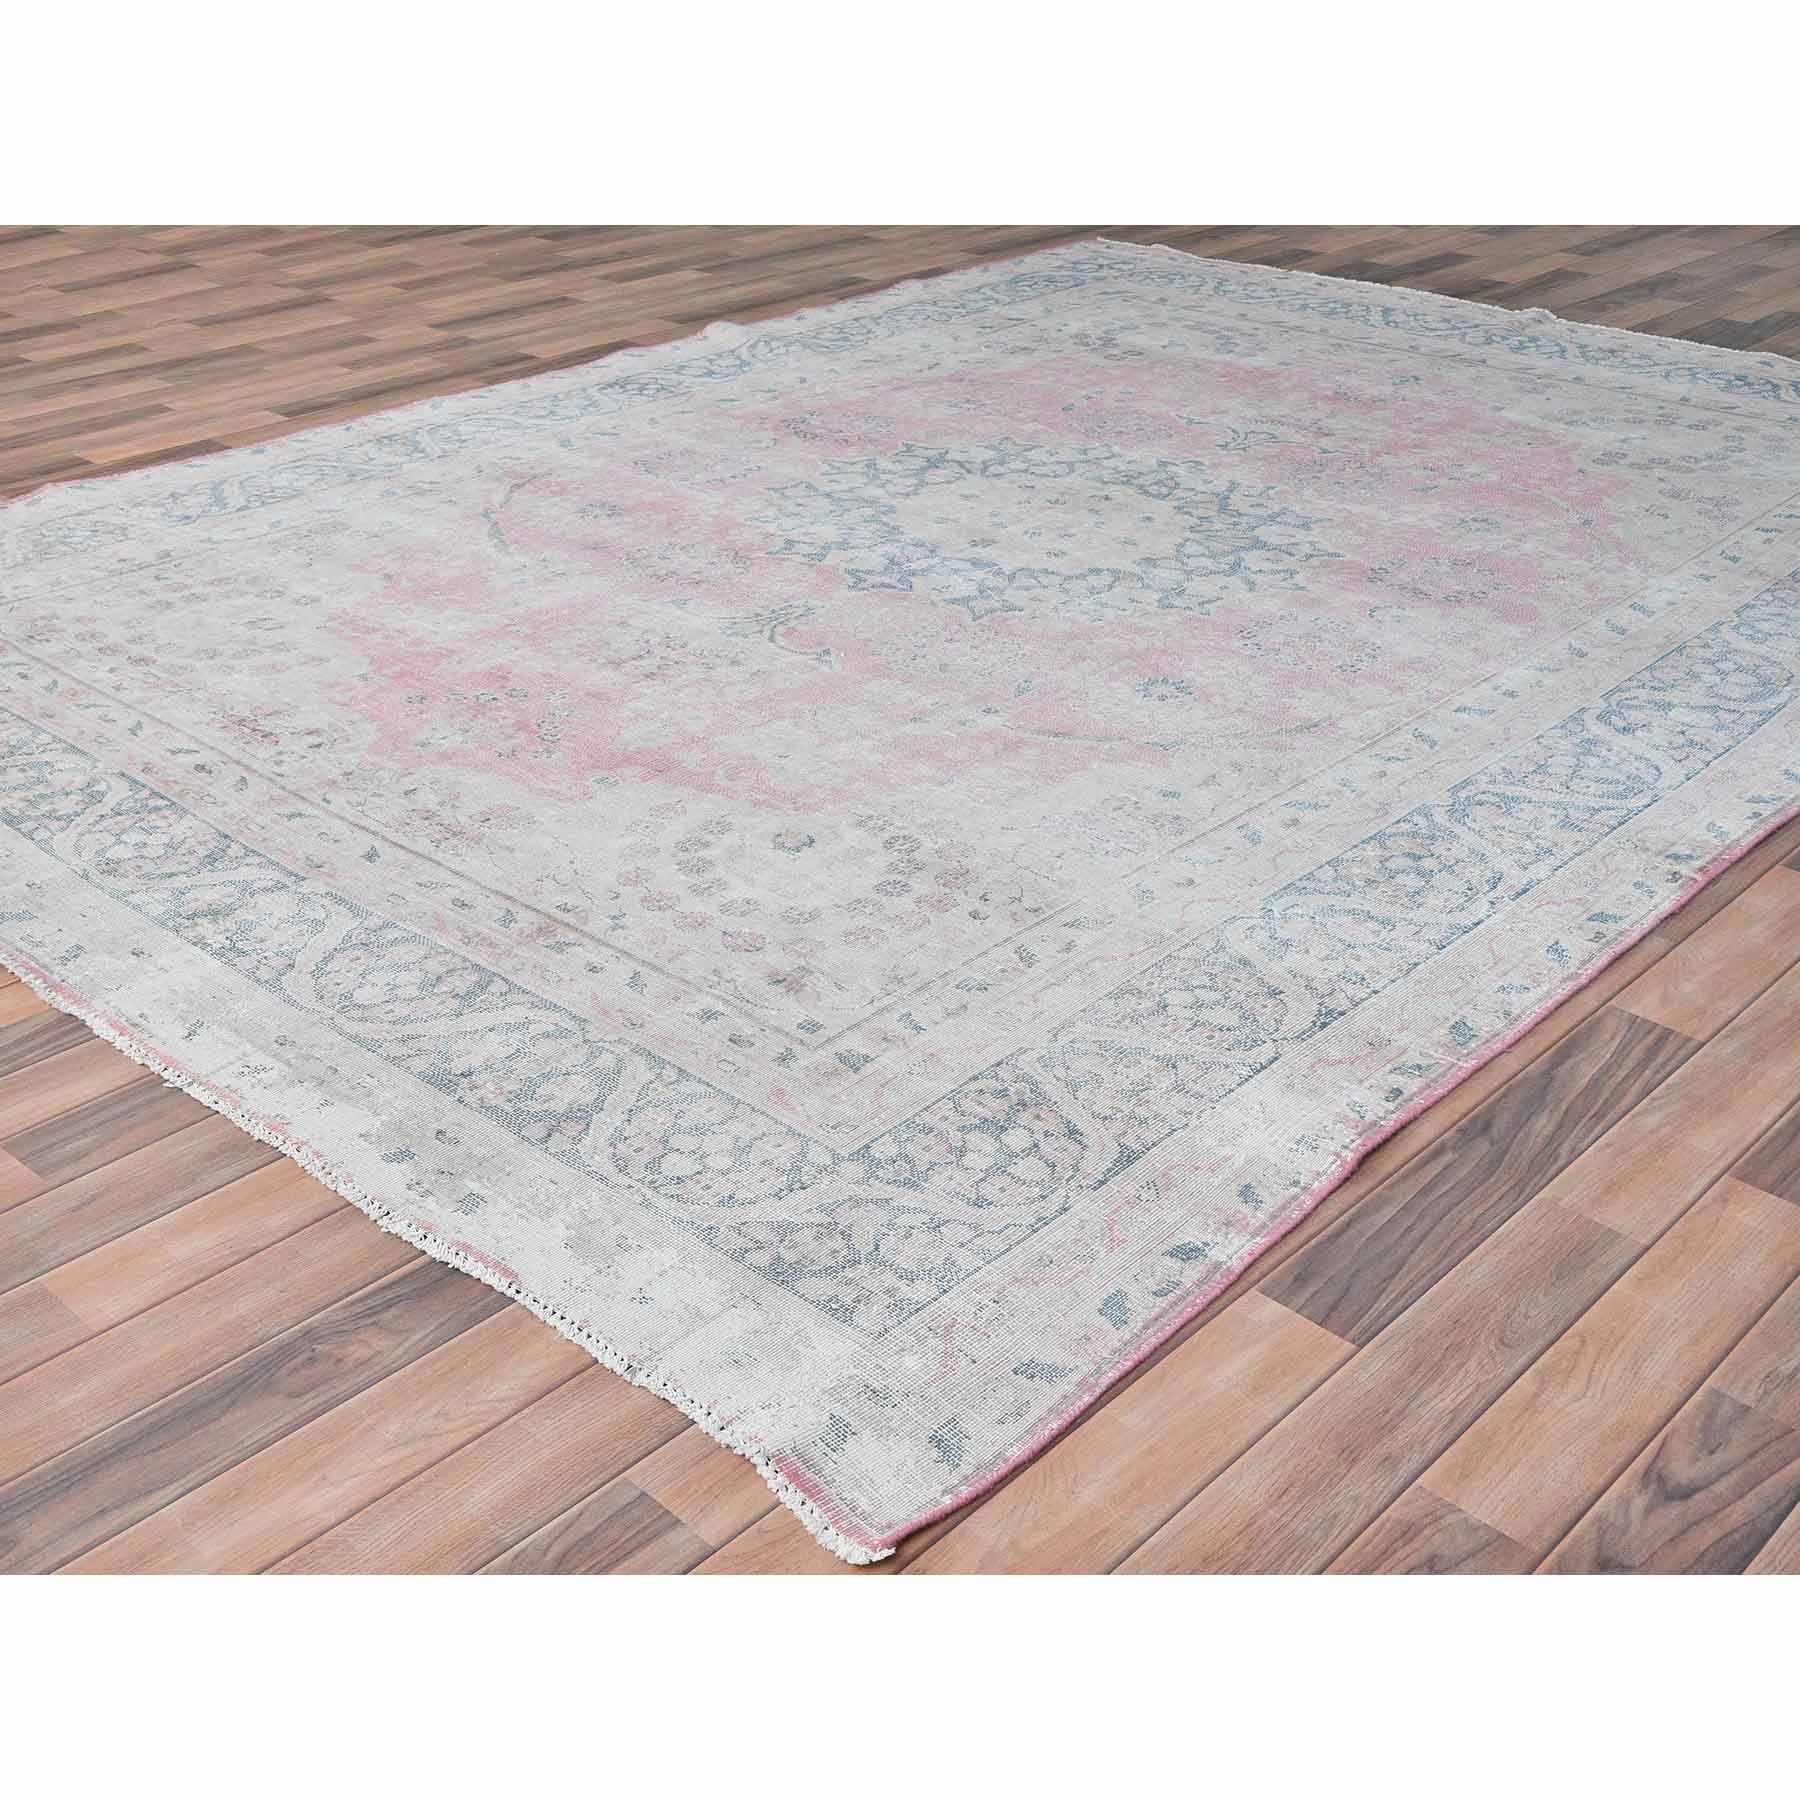 Persian-Hand-Knotted-Rug-409650